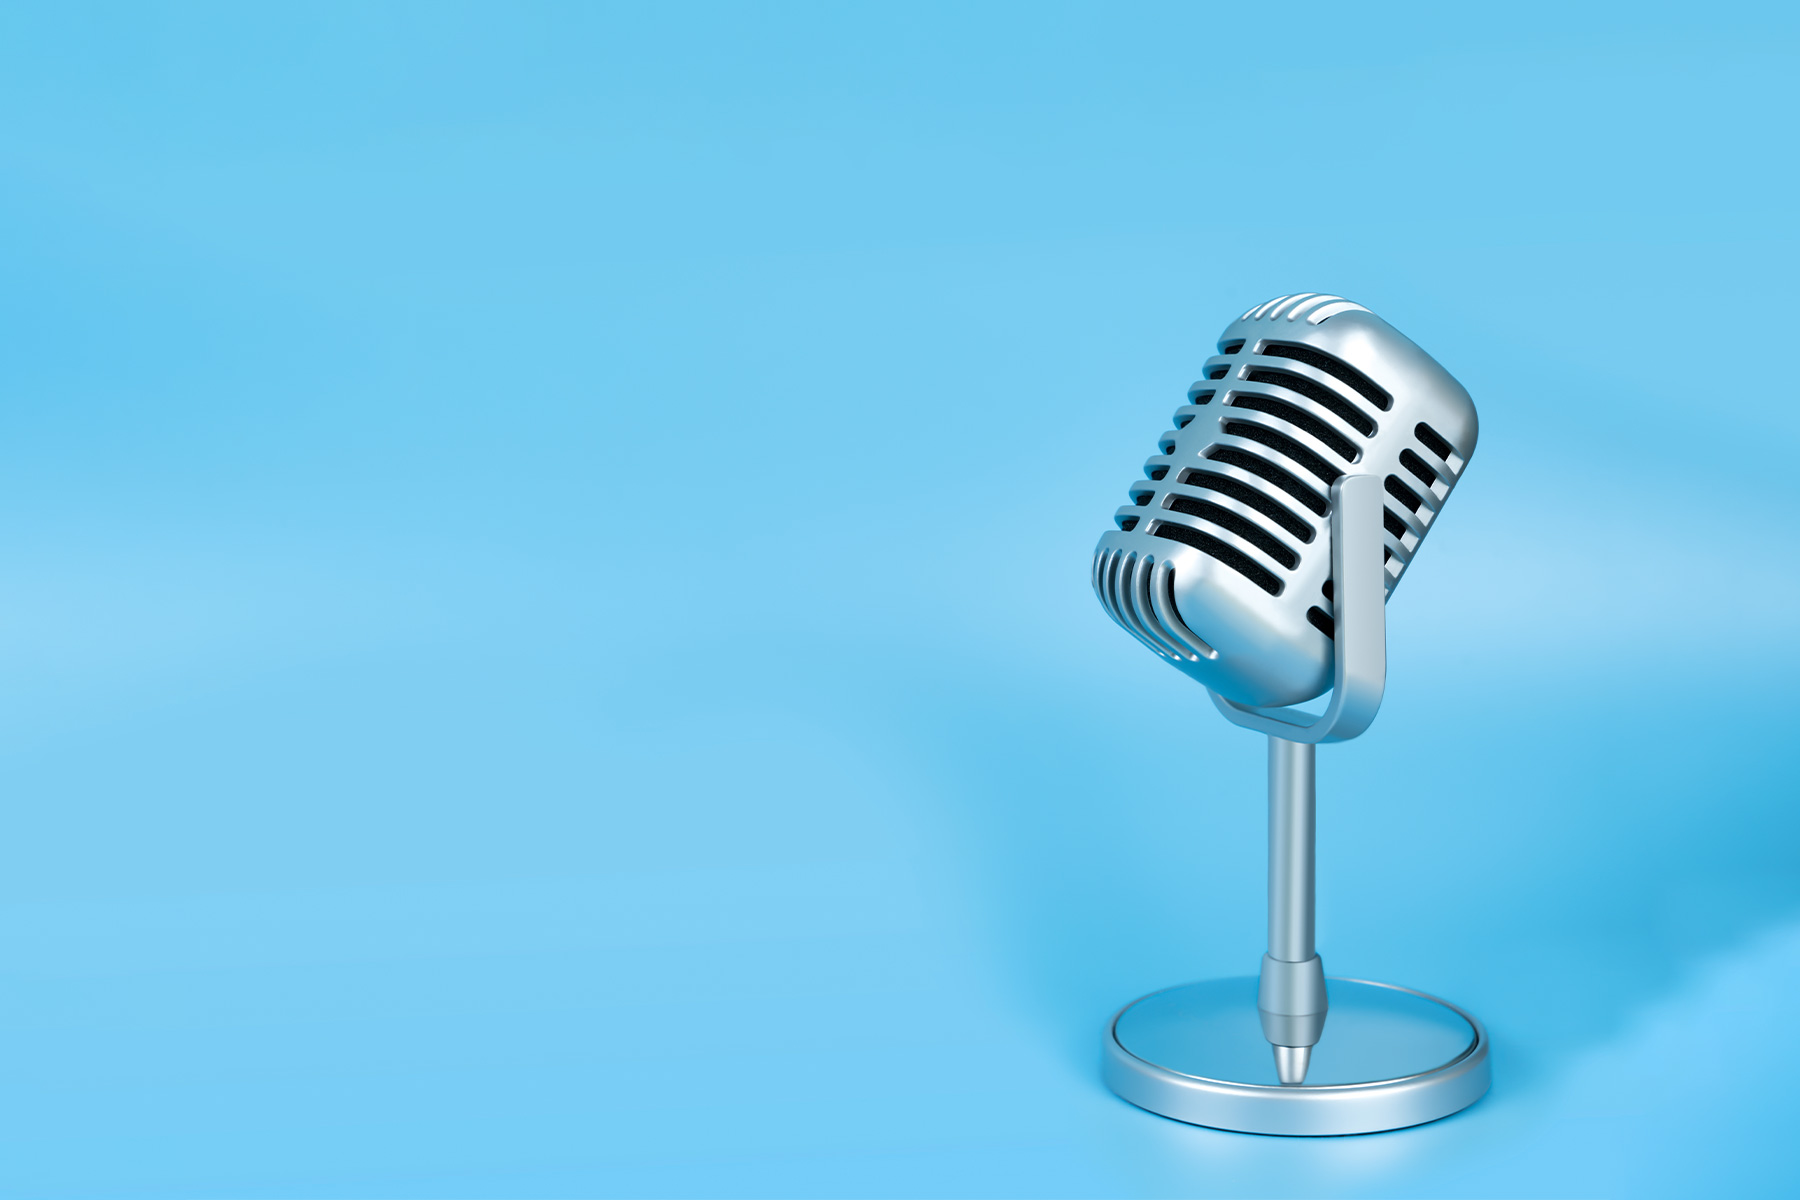 retro-style microphone on blue background